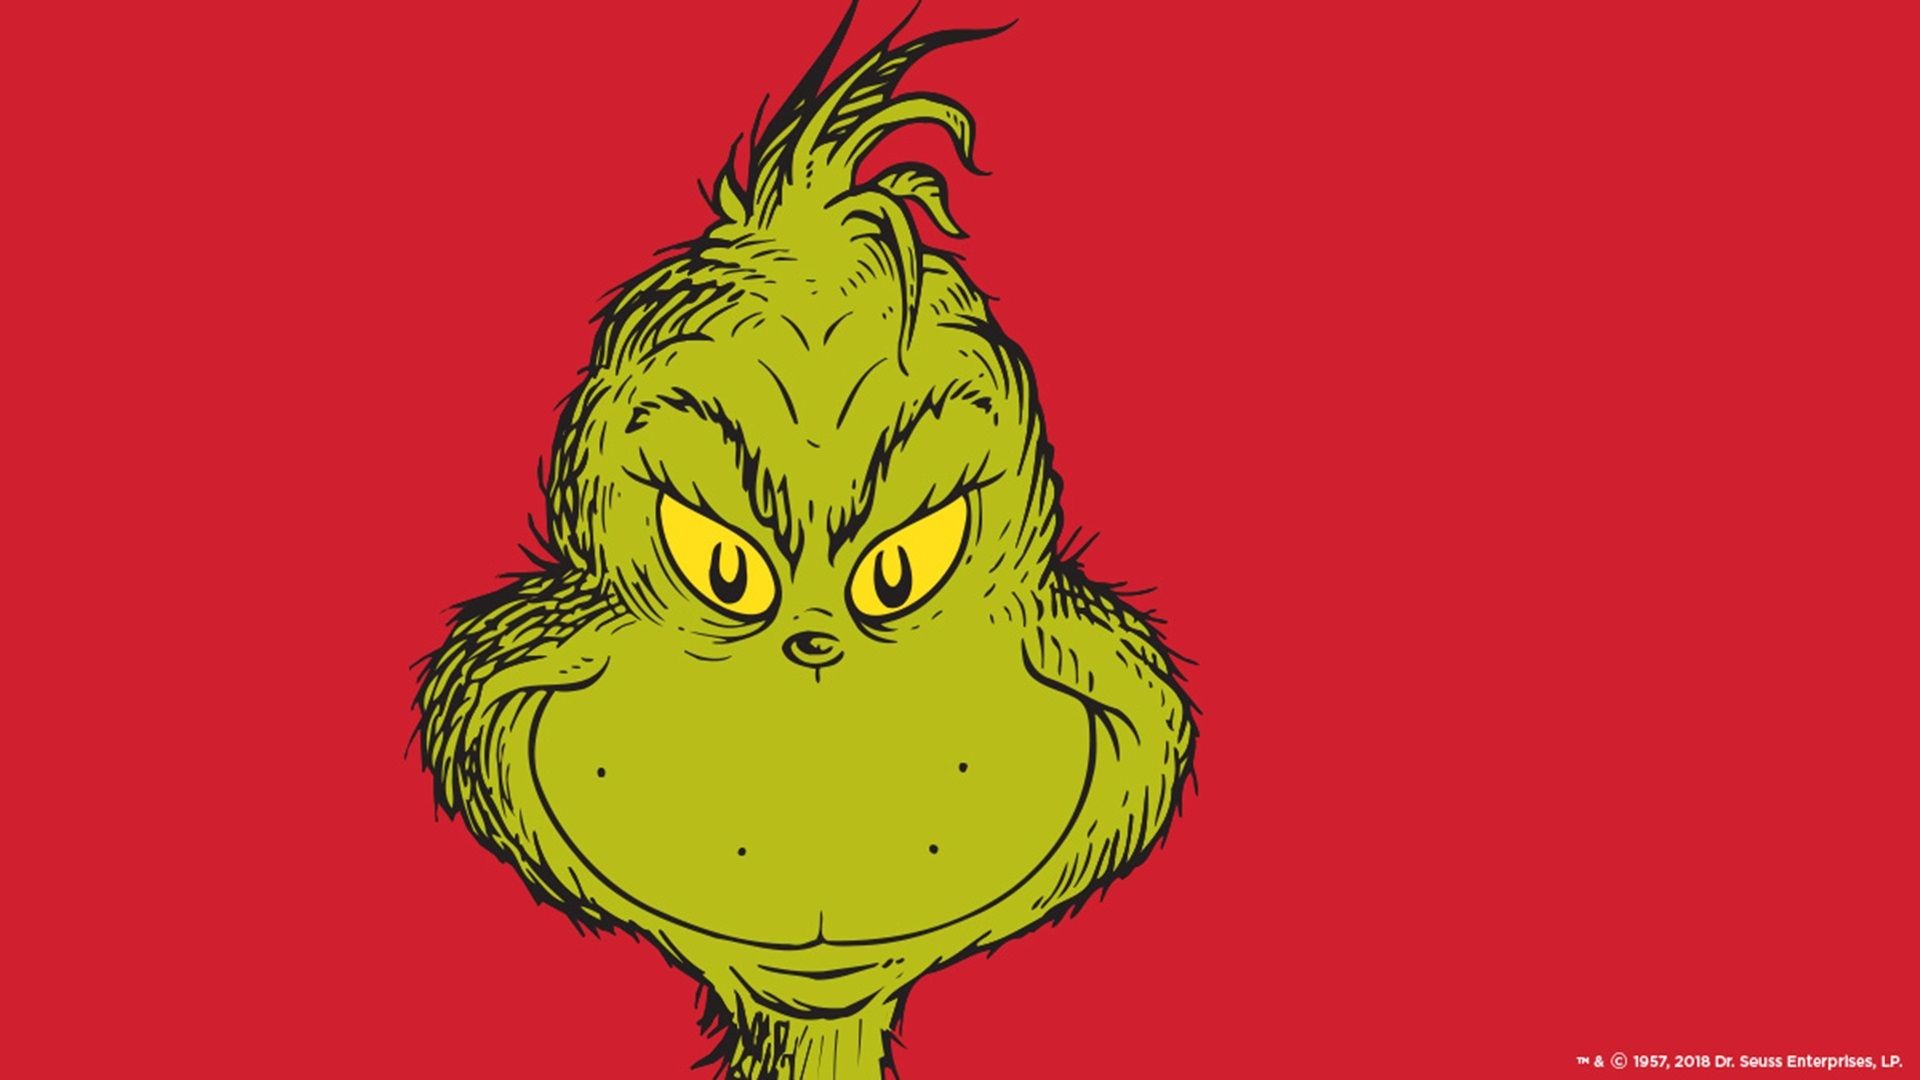 1920x1080 1366x768 The Grinch Wallpapers Wallpaper | HD Wallpapers | Pinterest |  Grinch .